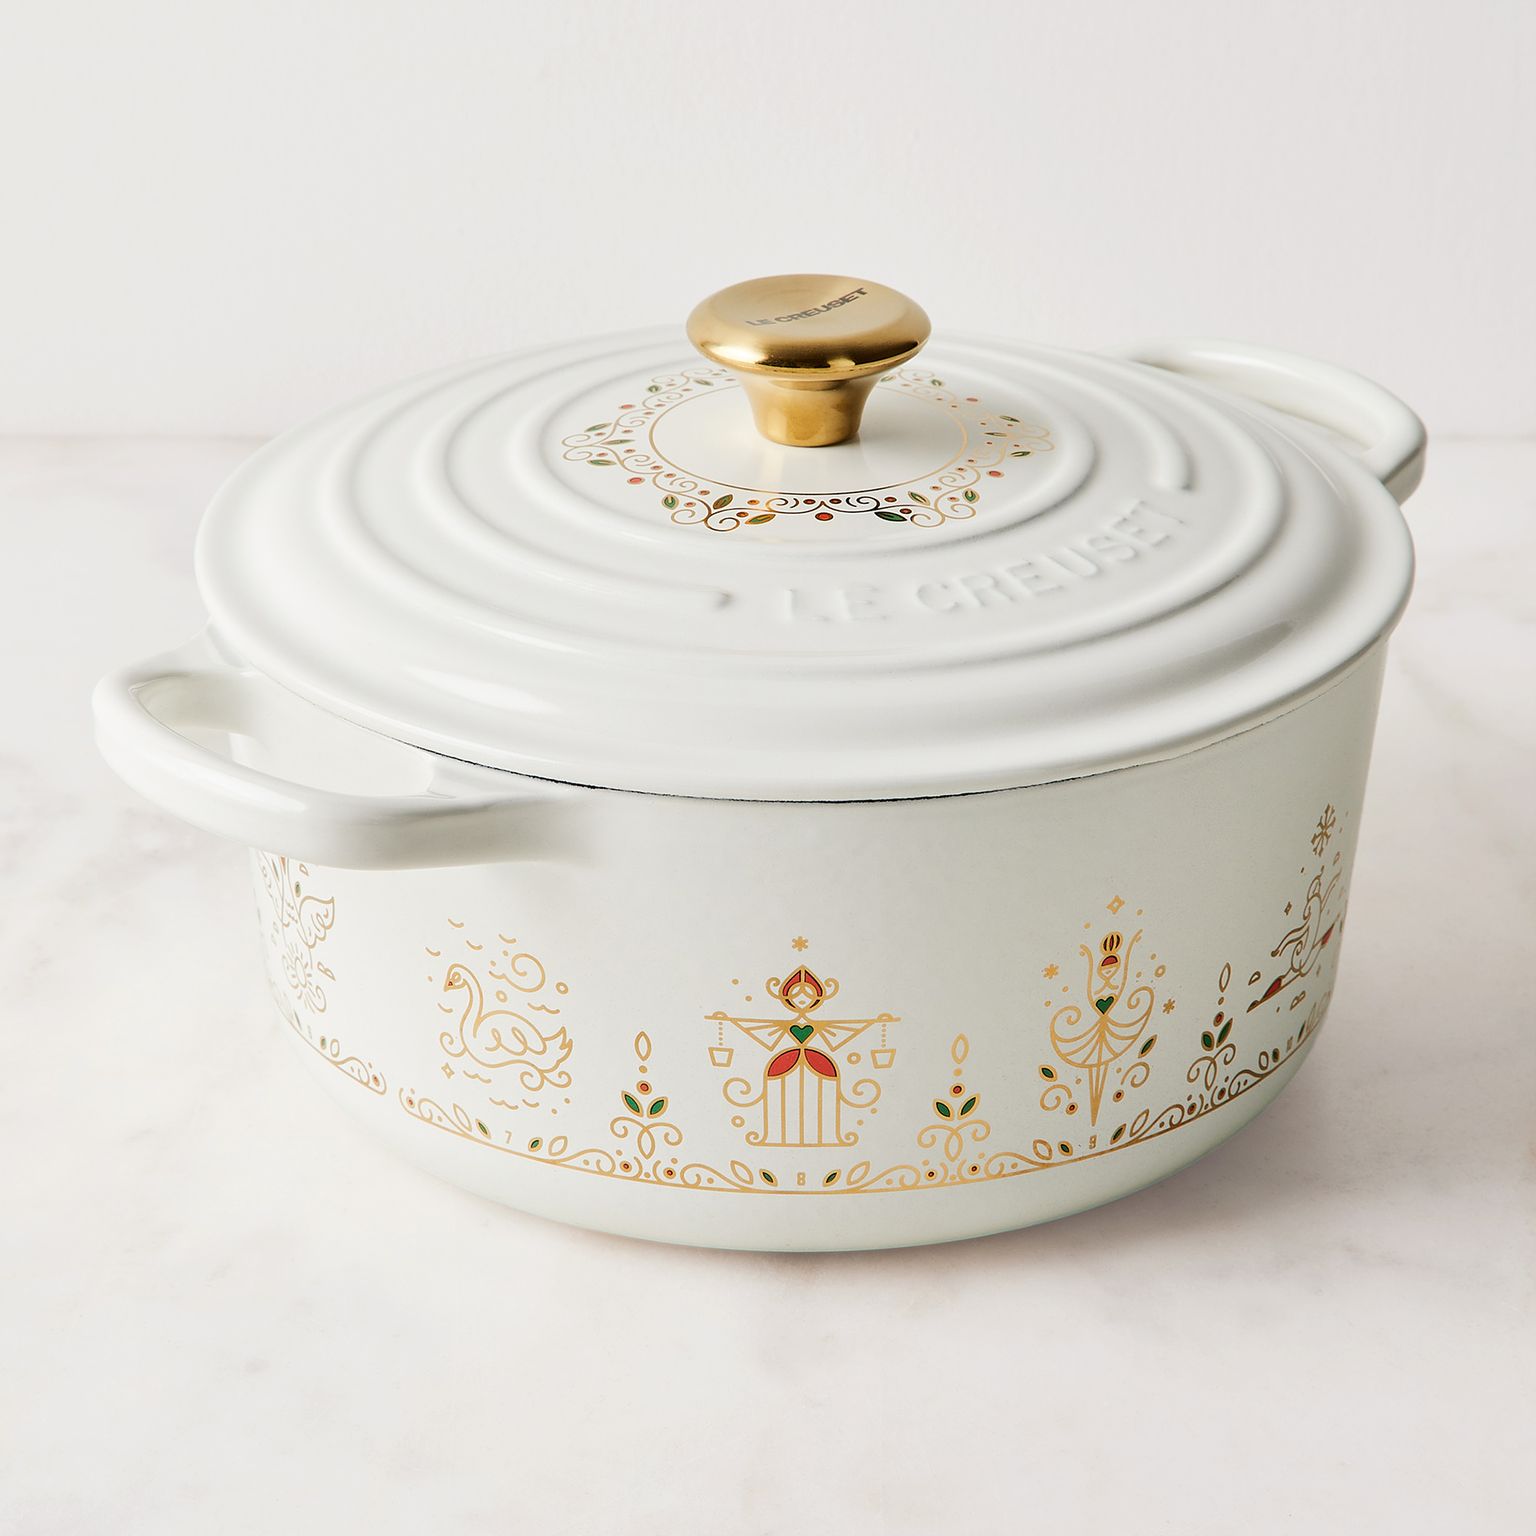 Le Creuset White 12 Days of Christmas 3.5-Qt. Round Dutch Oven